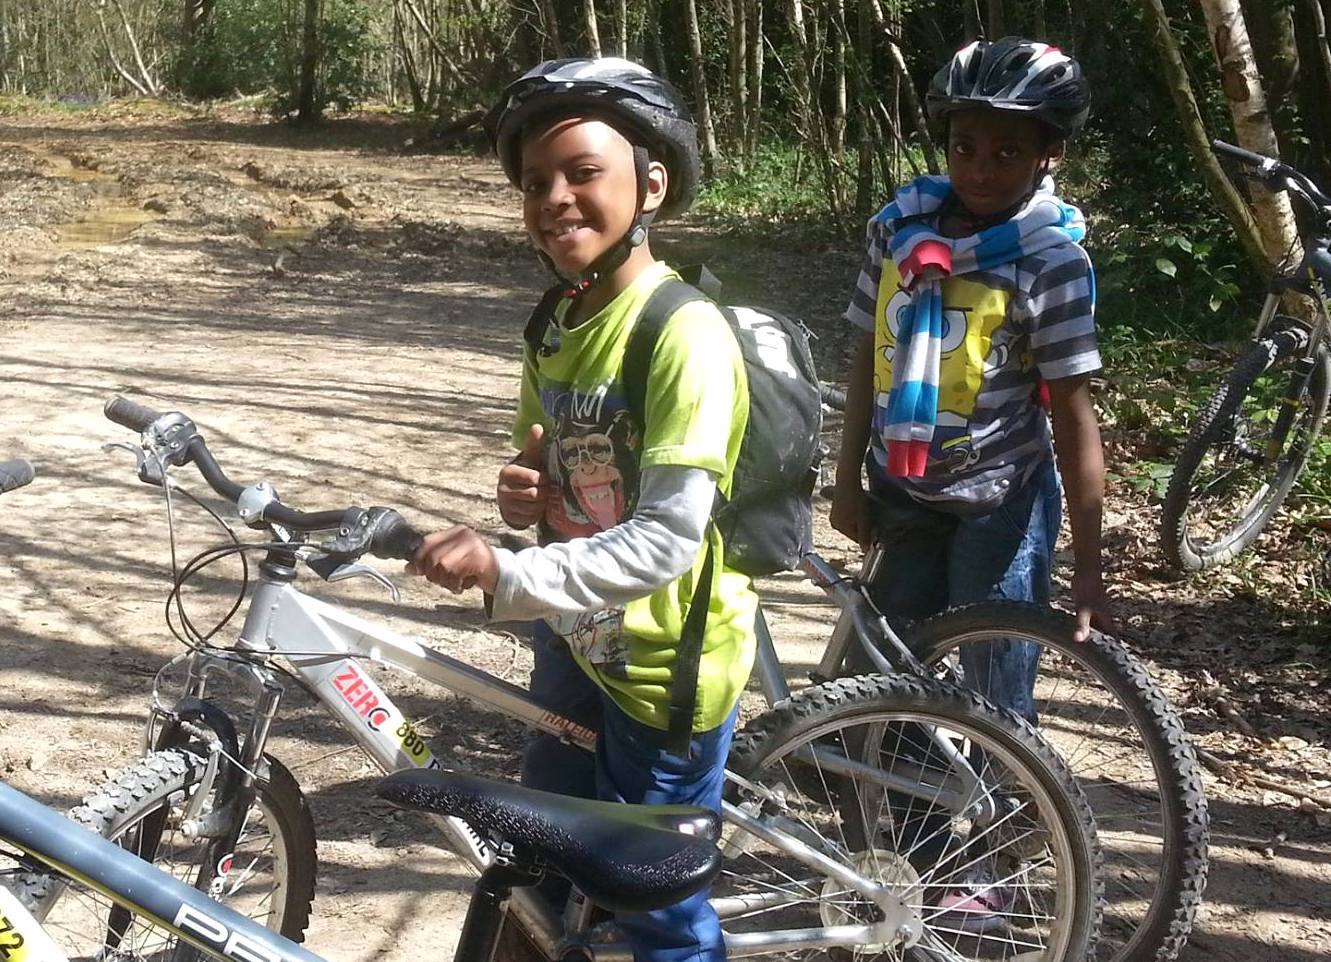 Young people out on a bike trip through the forest